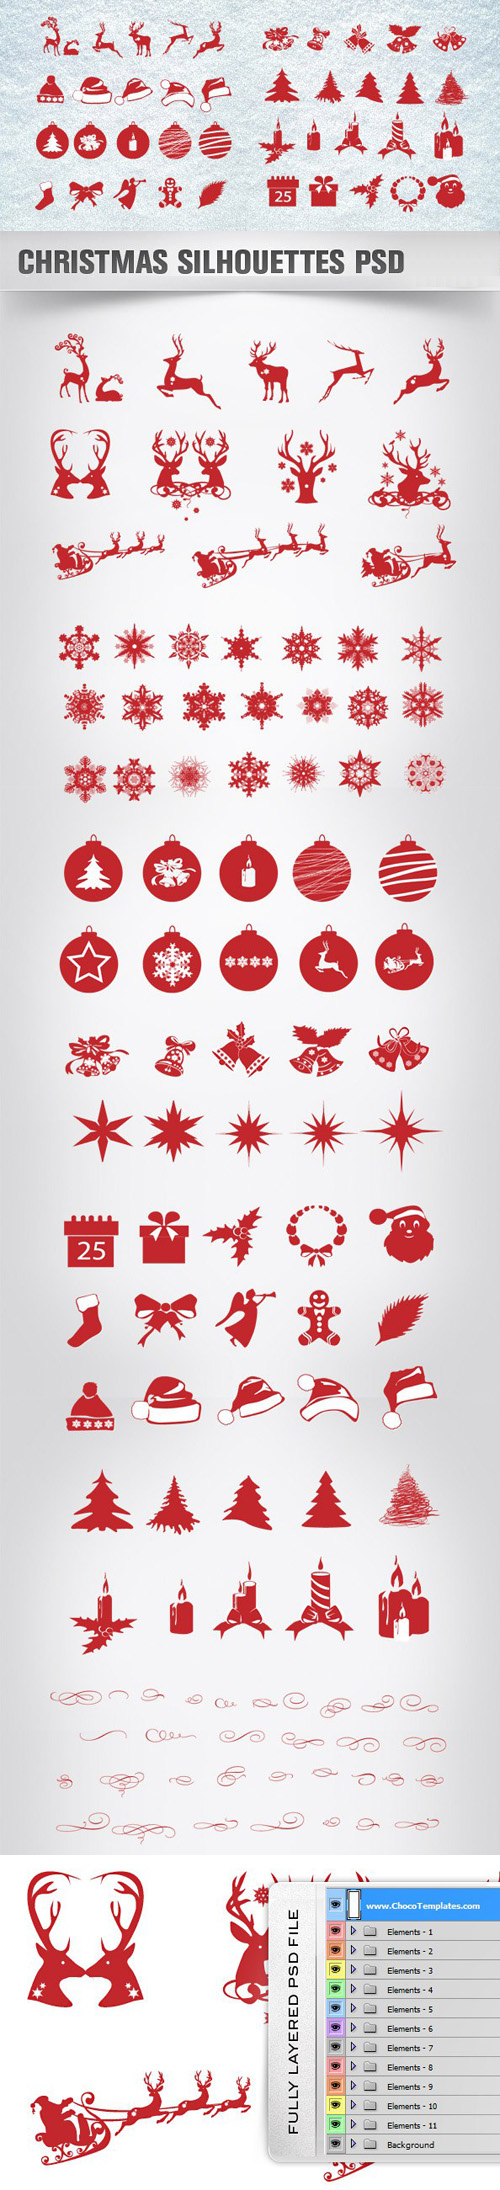 Christmas Silhouettes Mega Pack PSD Template